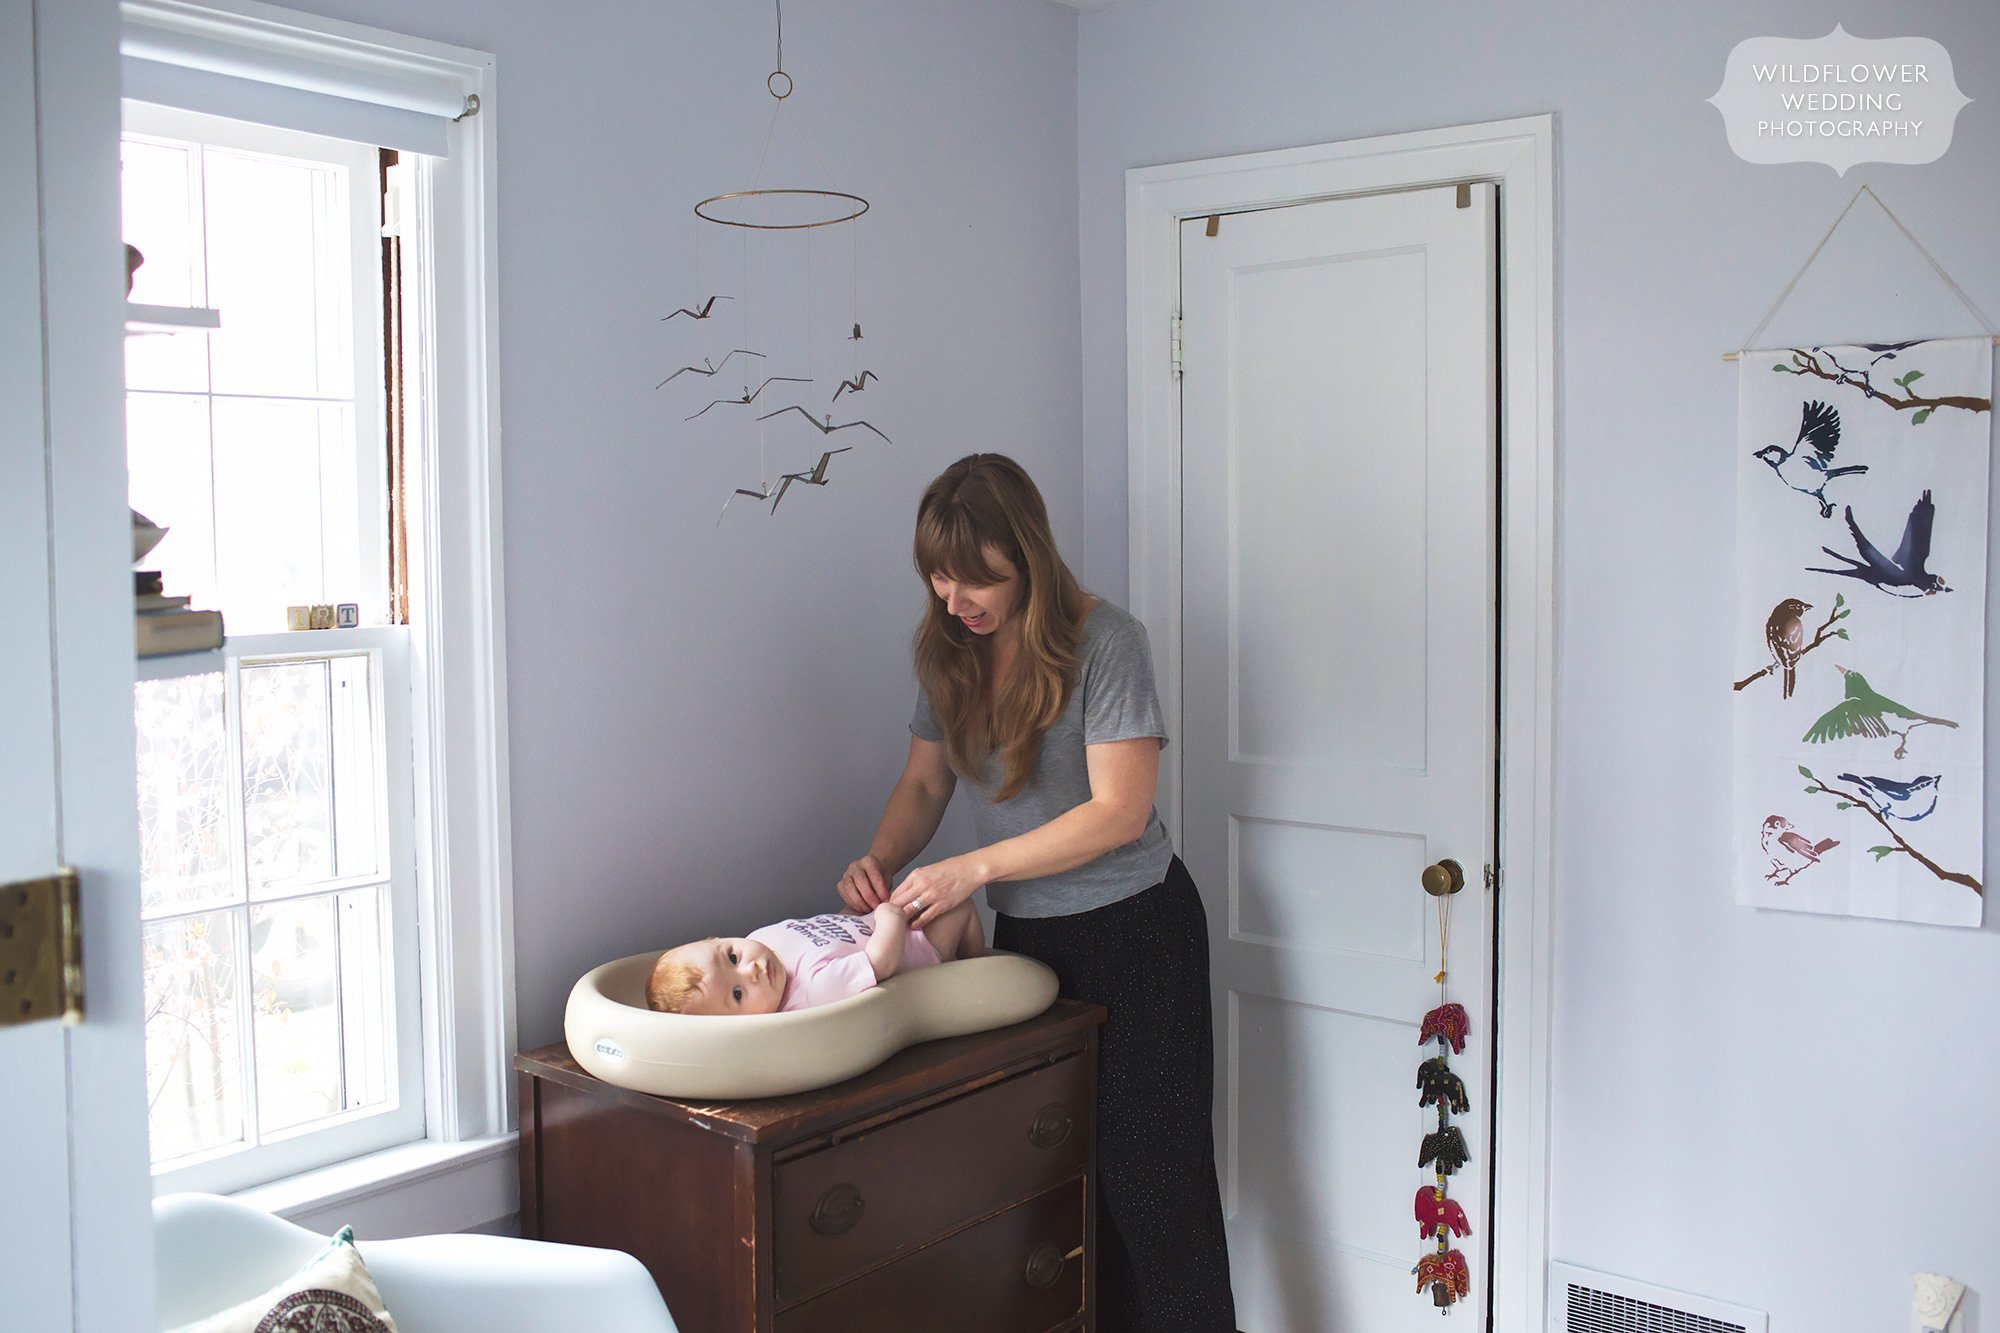 Candid photo of mother changing baby's diaper on Keekaroo Peanut at home during photo shoot in MO.